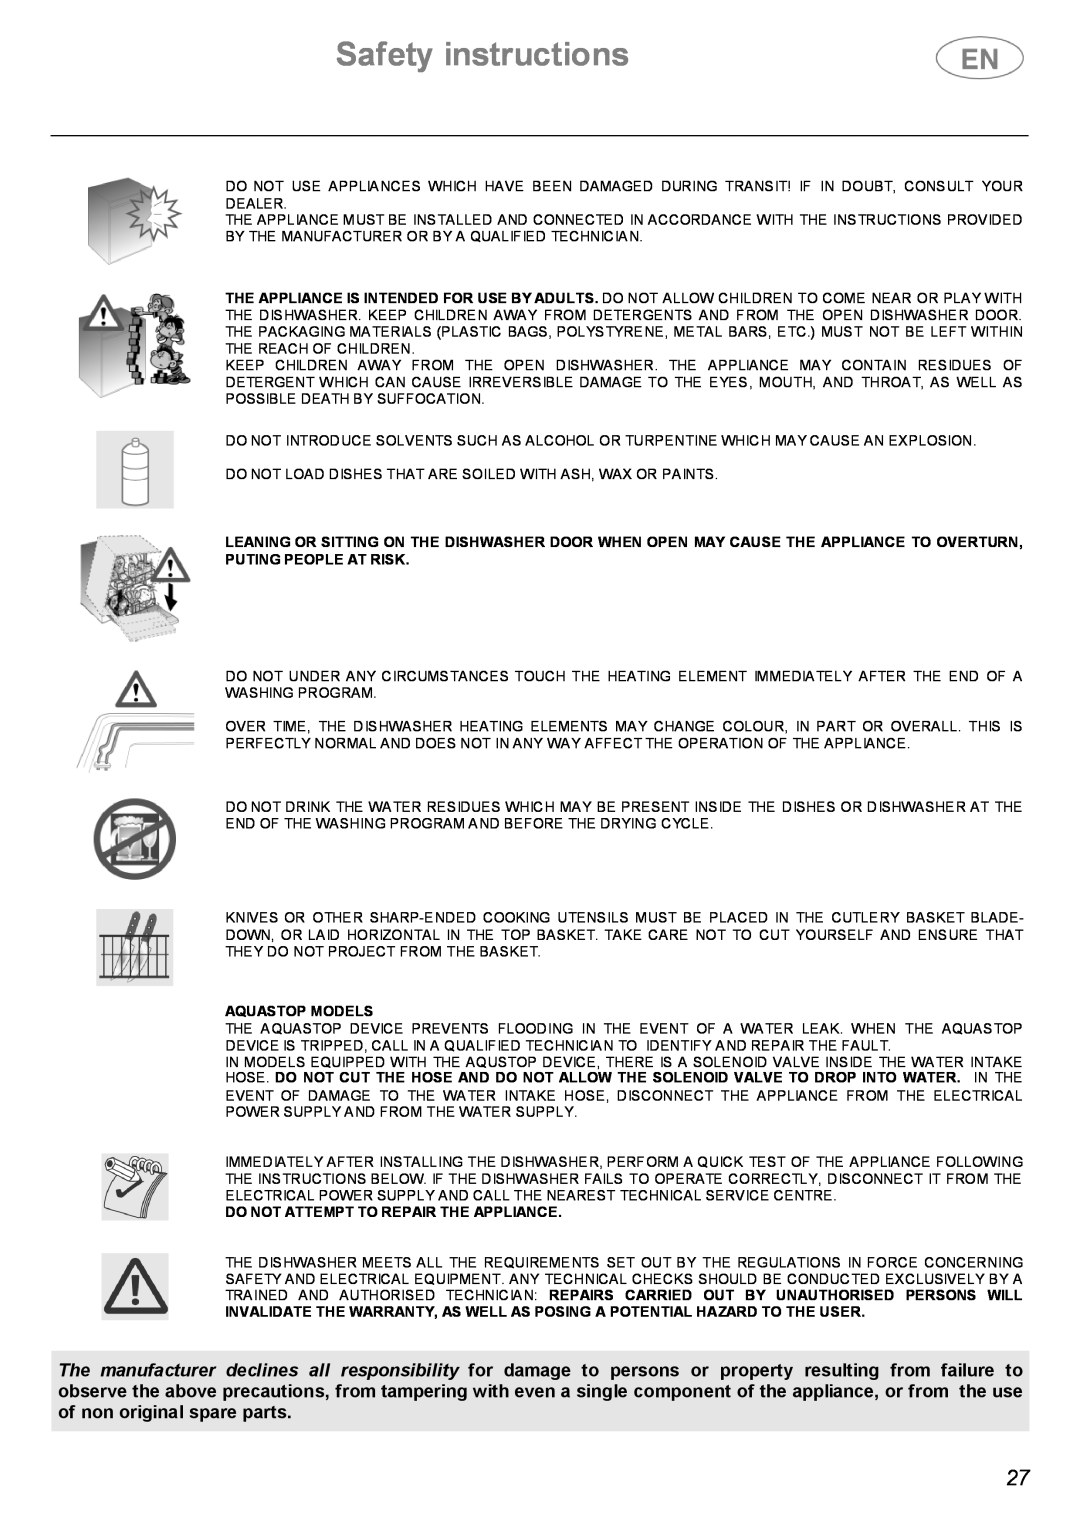 Smeg BL1S, BL2S instruction manual Safety instructions, Aquastop Models, Do Not Attempt To Repair The Appliance 